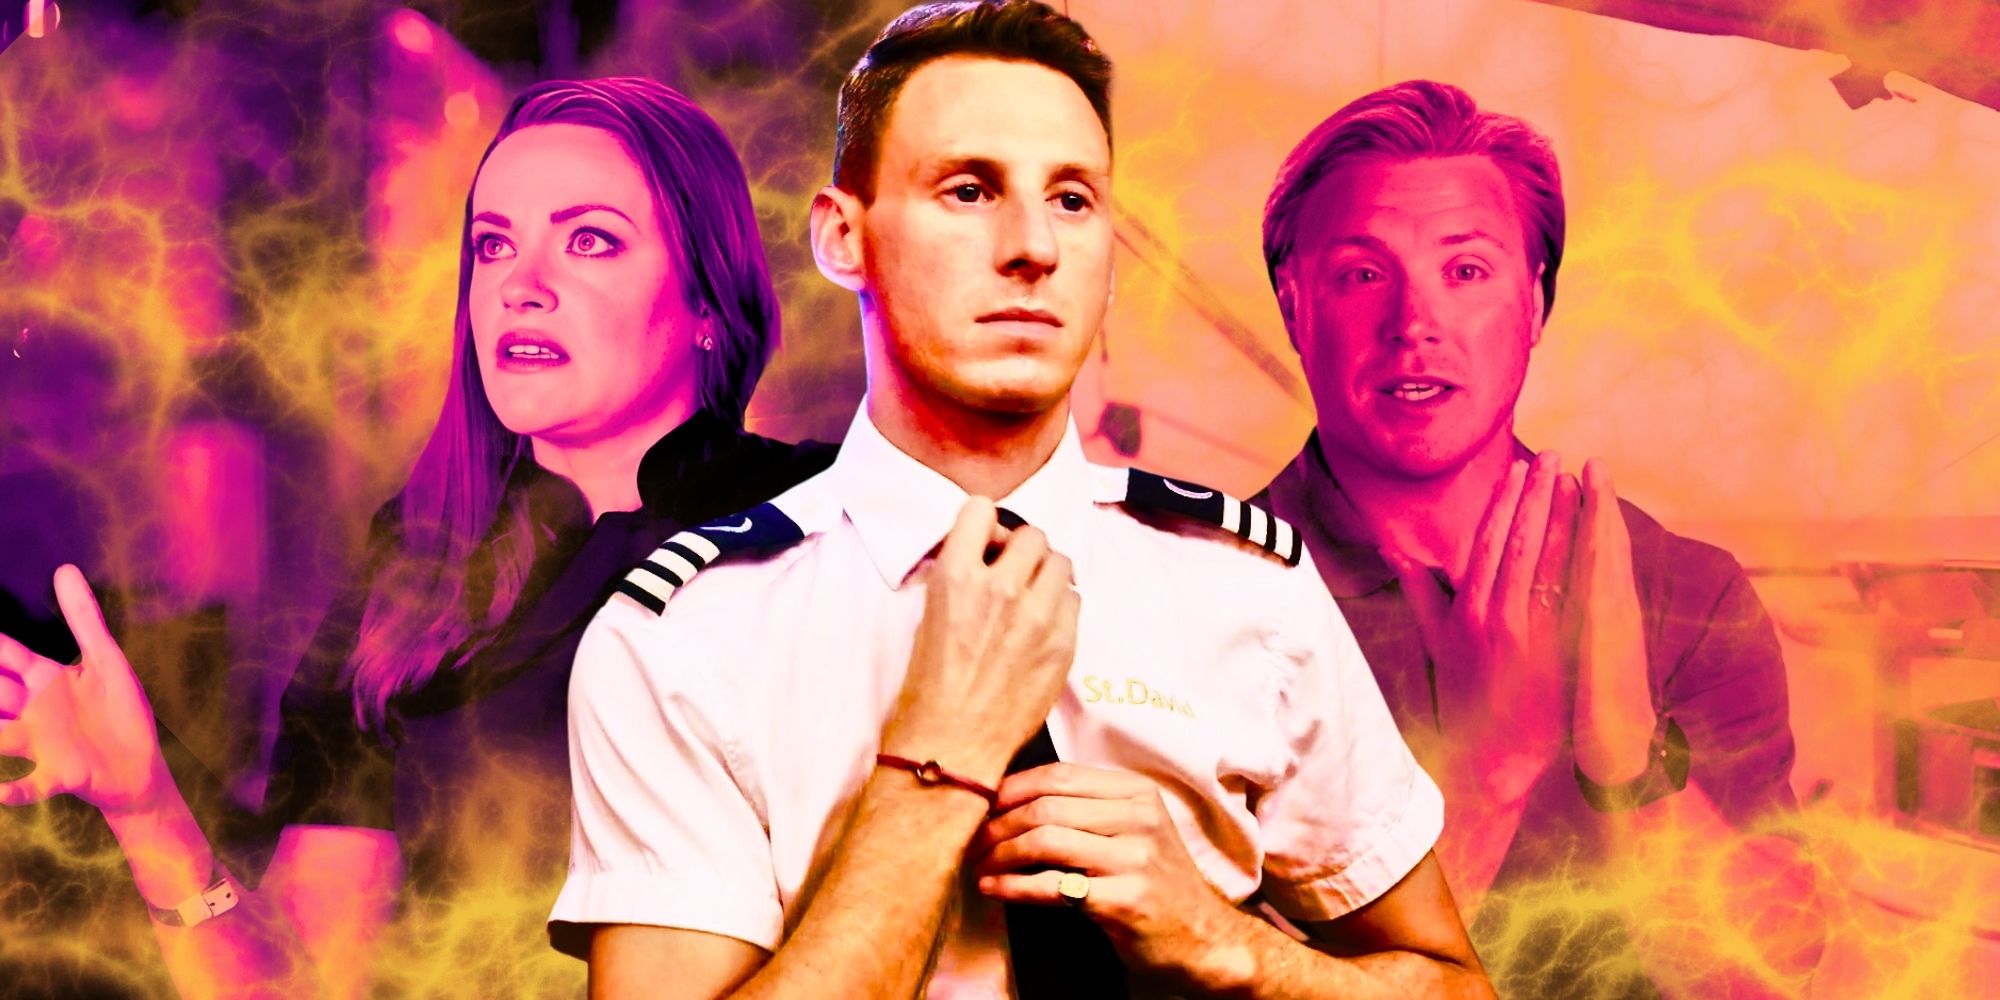 Rachel, Fraser, and Paget from Below Deck franchise with smoke around them orange and purple filtered background